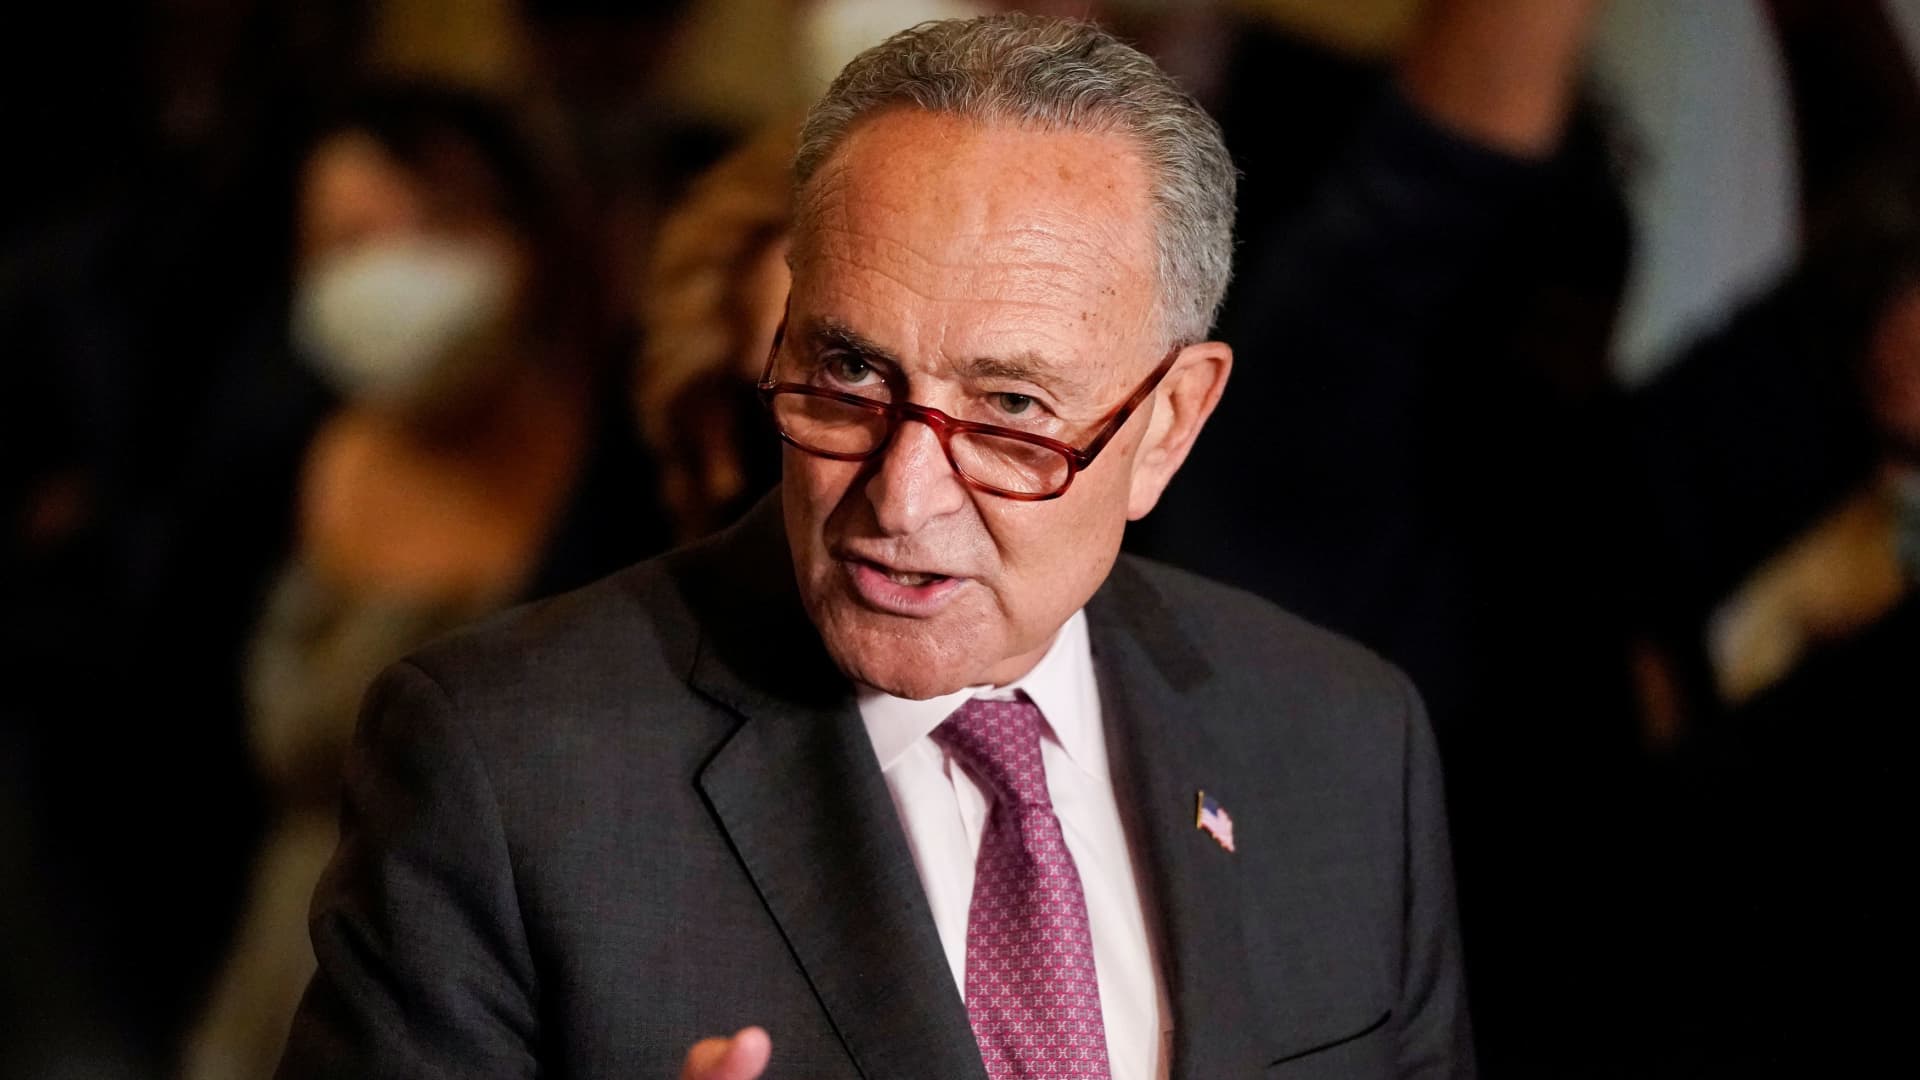 U.S. Senate Majority Leader Chuck Schumer (D-NY) speaks to reporters following the Senate Democrats weekly policy lunch at the U.S. Capitol in Washington, U.S., September 28, 2021.